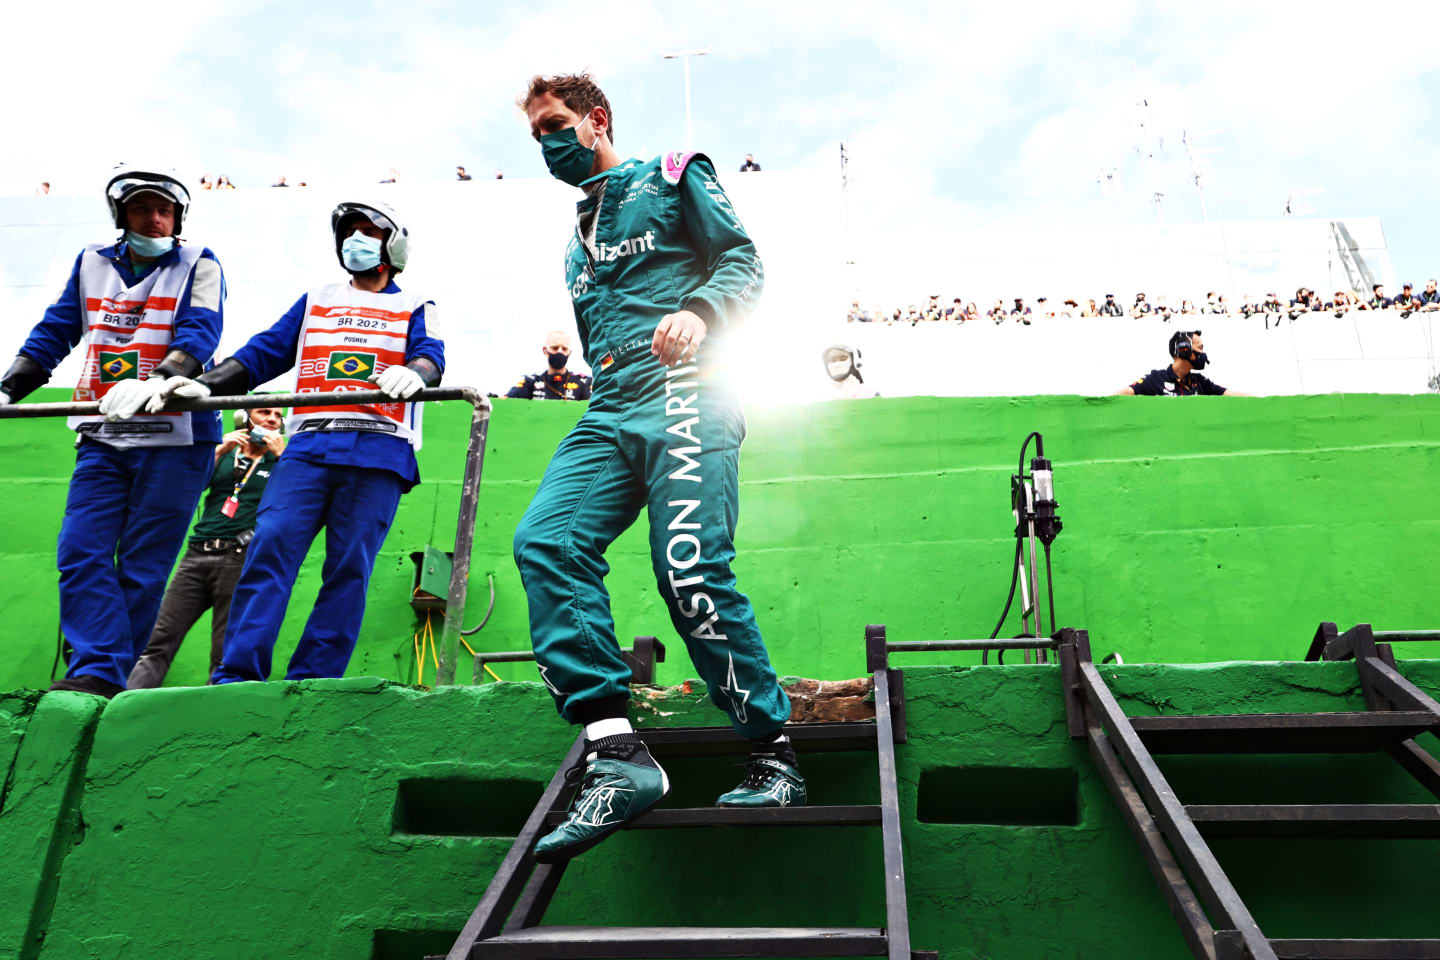 SAO PAULO, BRAZIL - NOVEMBER 13: Sebastian Vettel of Germany and Aston Martin F1 Team prepares to drive on the grid during the sprint ahead of the F1 Grand Prix of Brazil at Autodromo Jose Carlos Pace on November 13, 2021 in Sao Paulo, Brazil. (Photo by Mark Thompson/Getty Images)